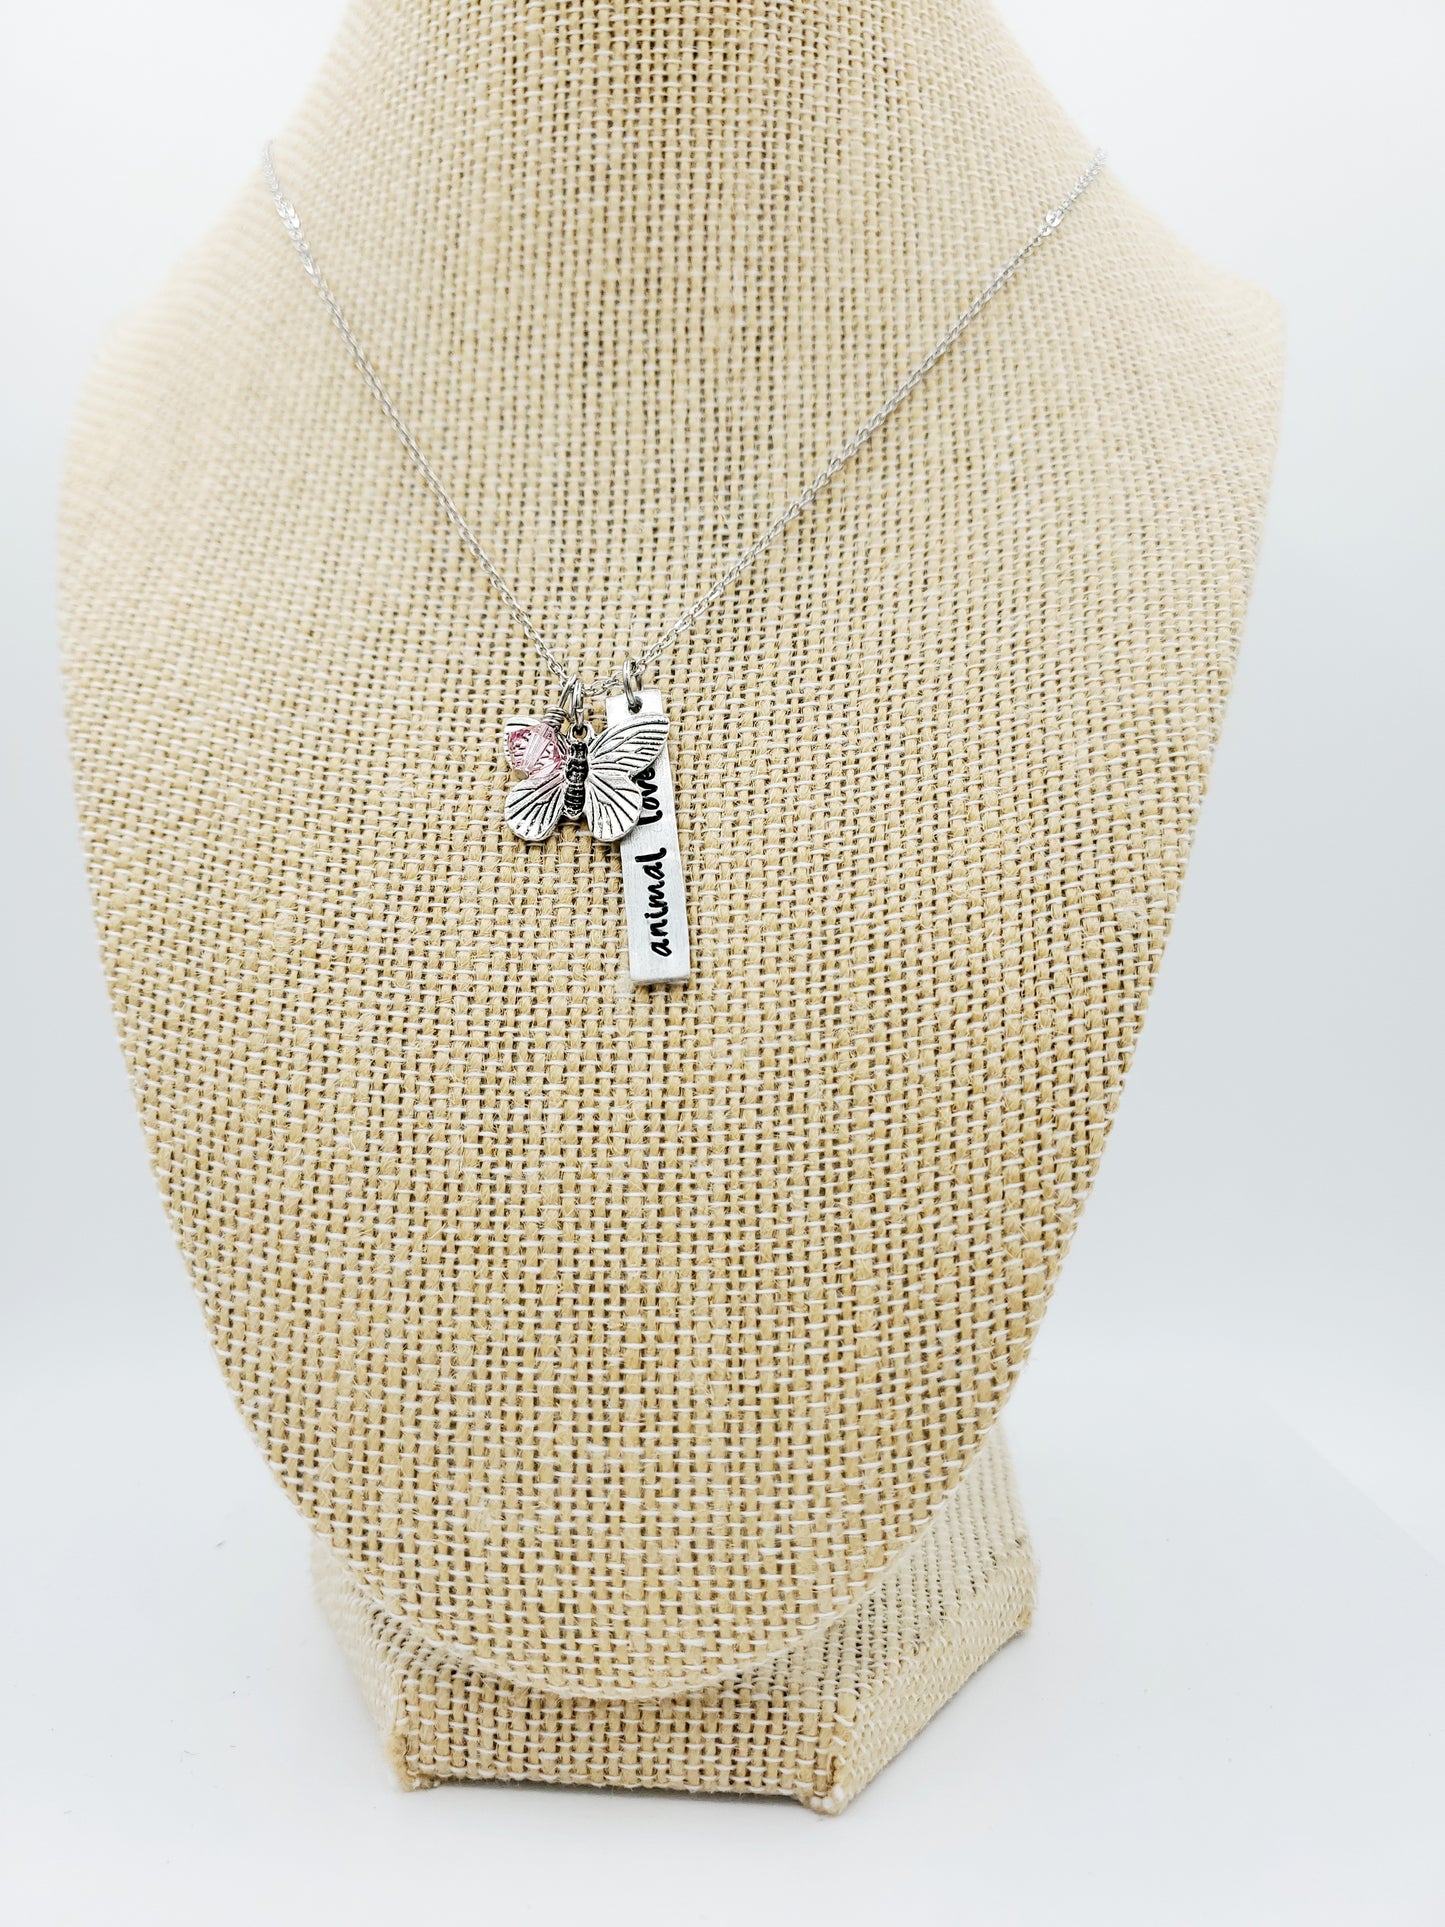 Create Your Own Charm Necklace